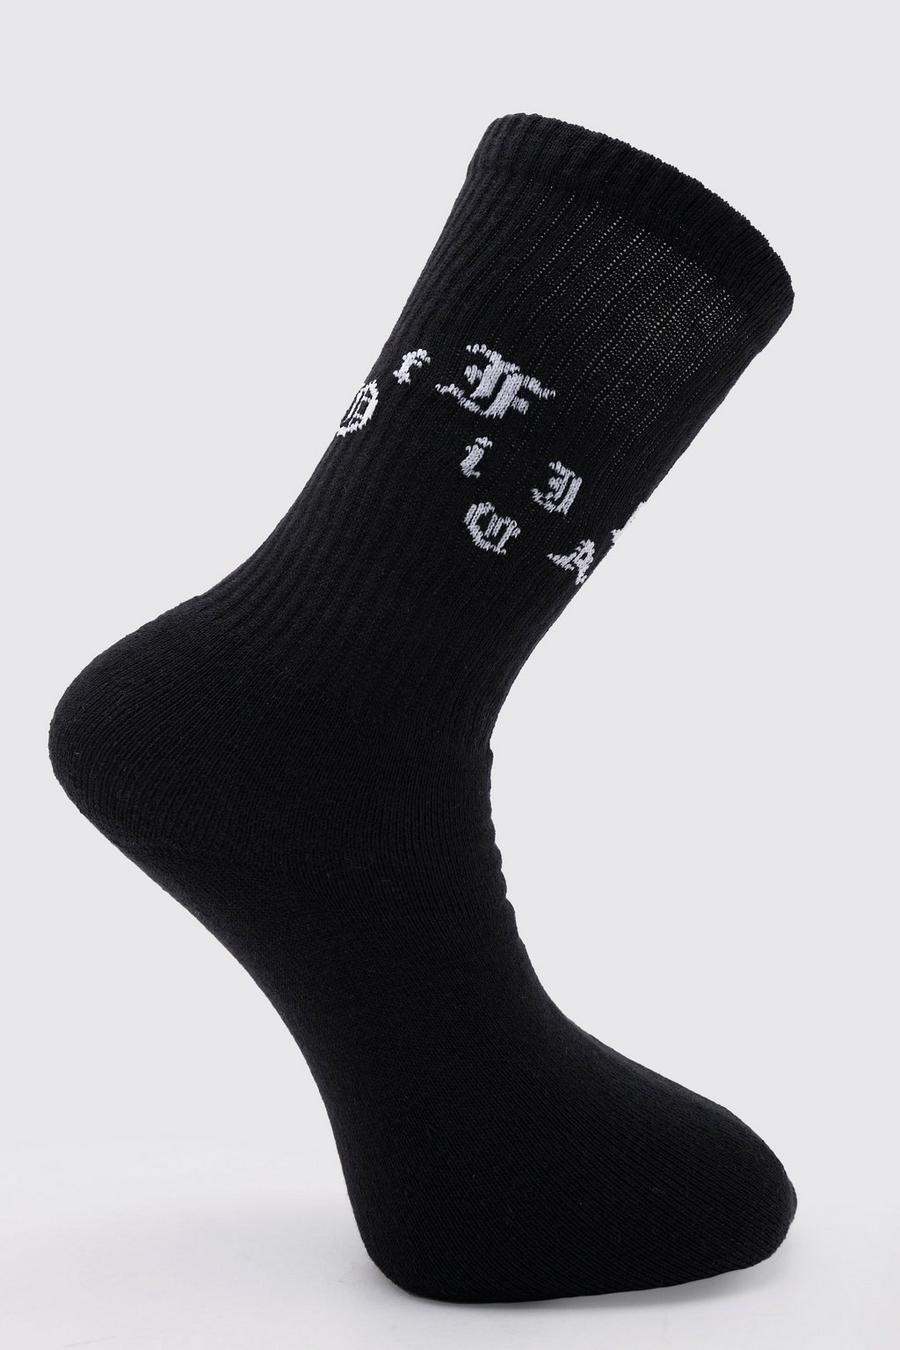 Black 1 Pack Official Illusion Sock